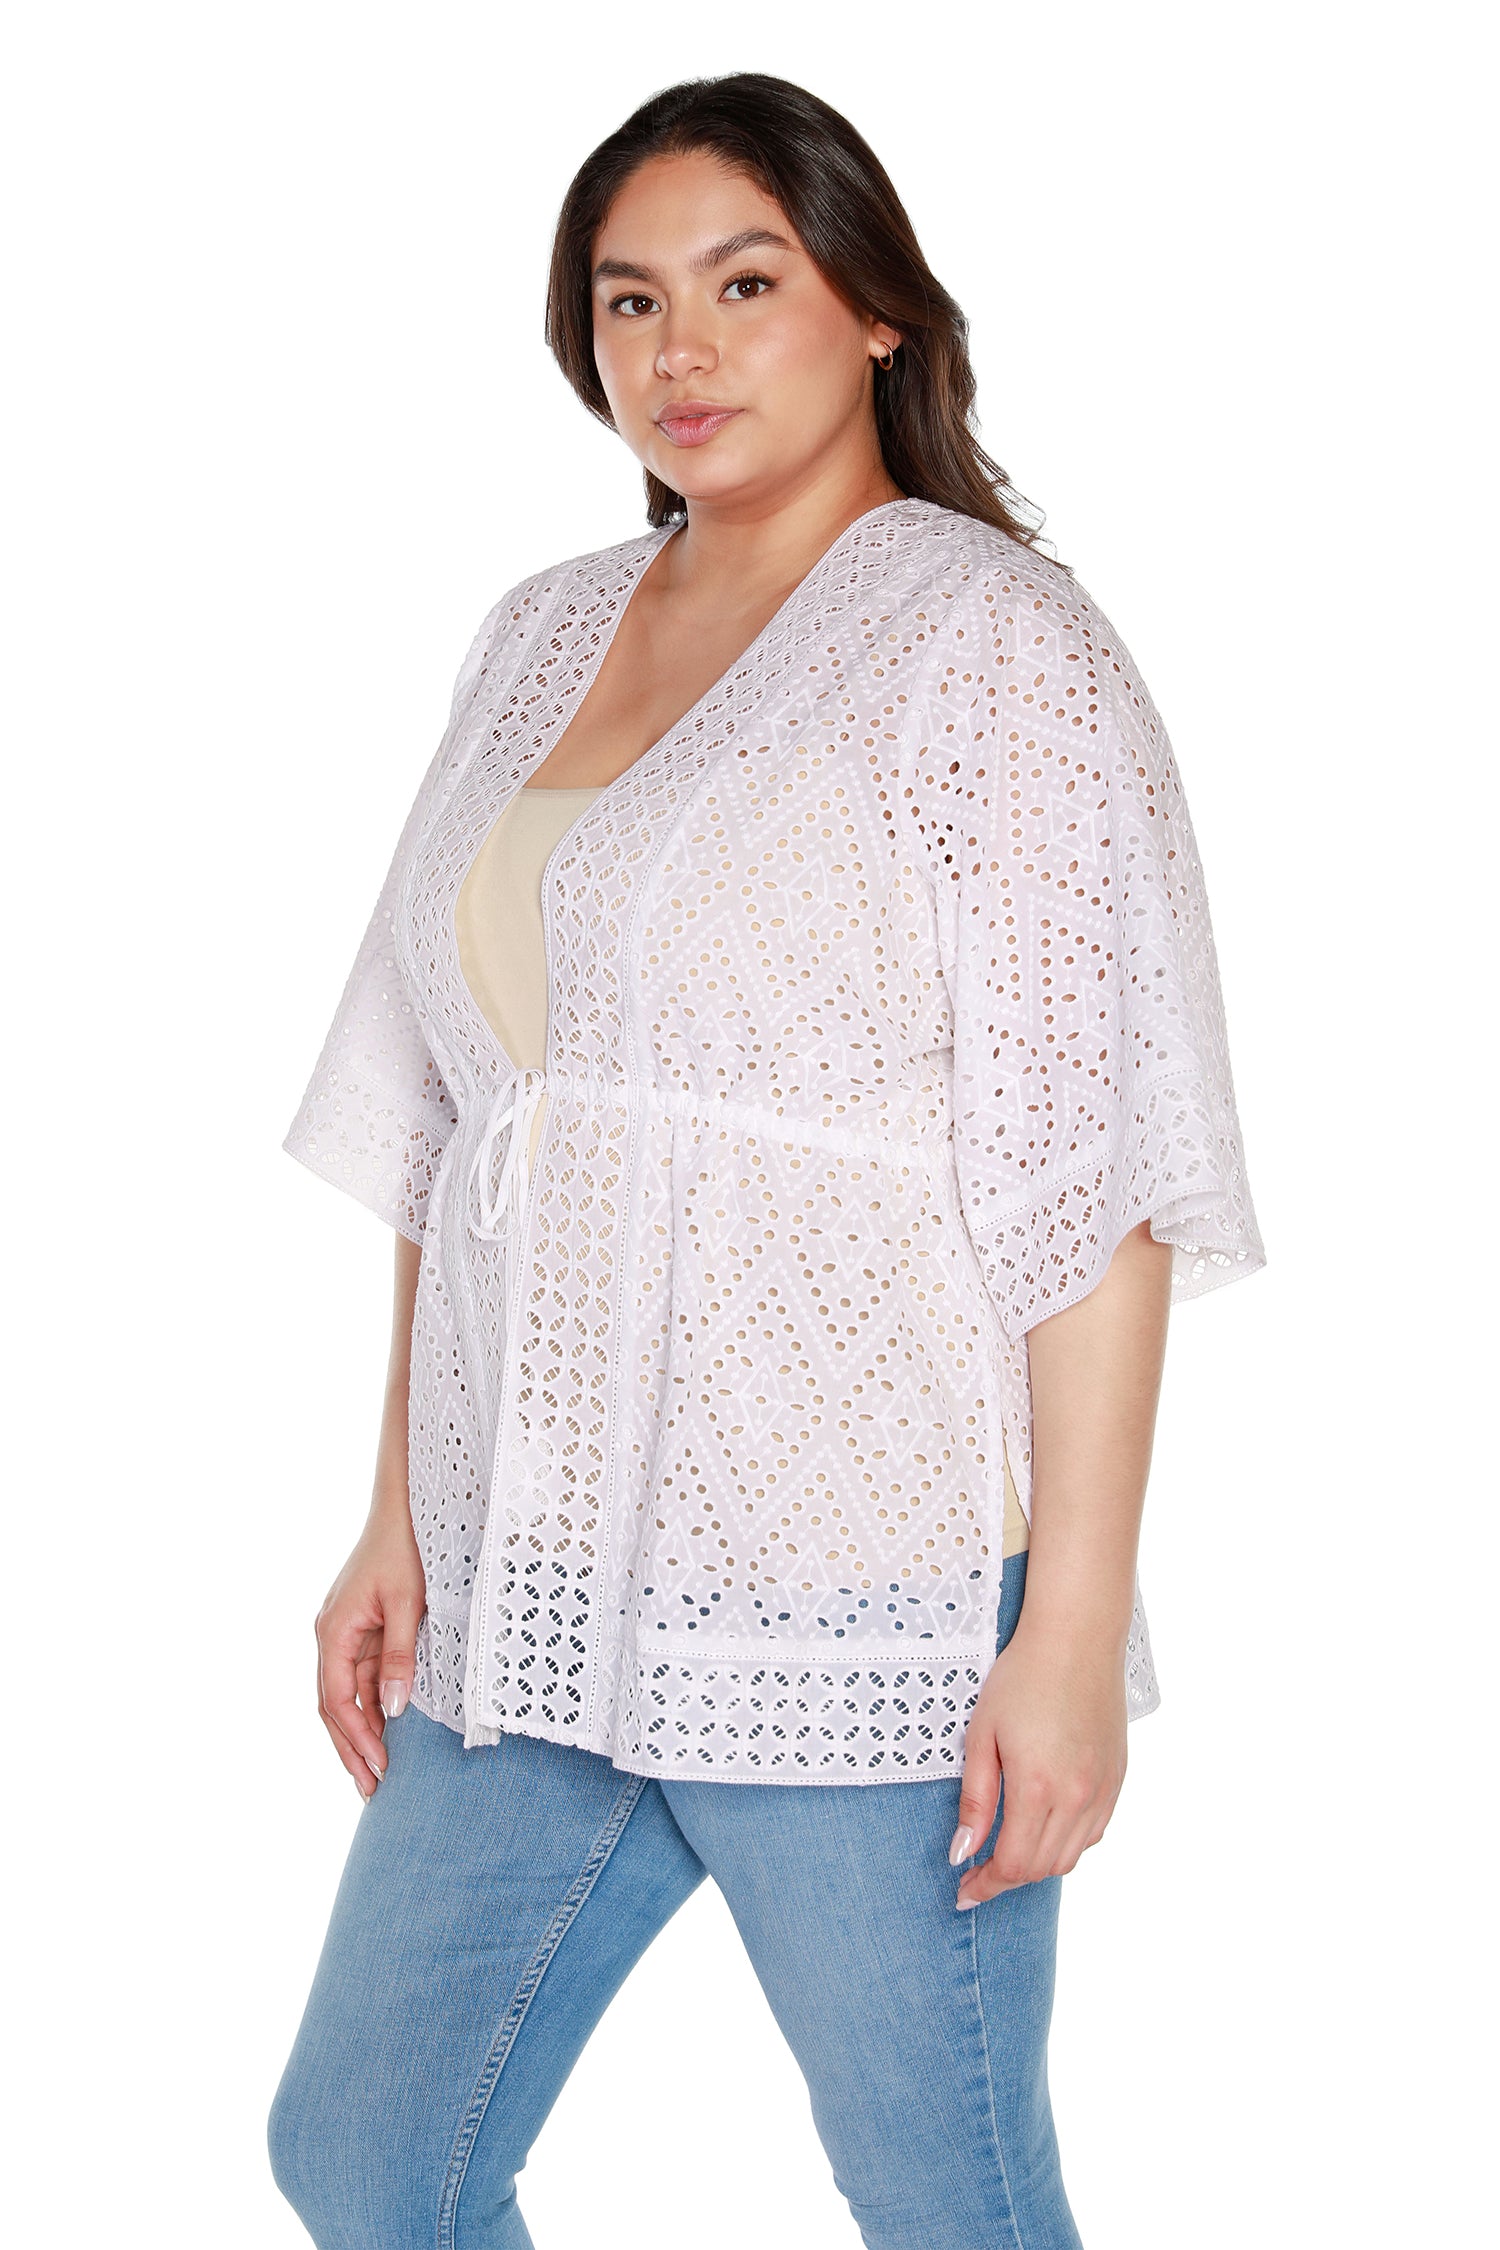 Women's Cotton Eyelet and Embroidery Kimono with Tie at Waist | Curvy